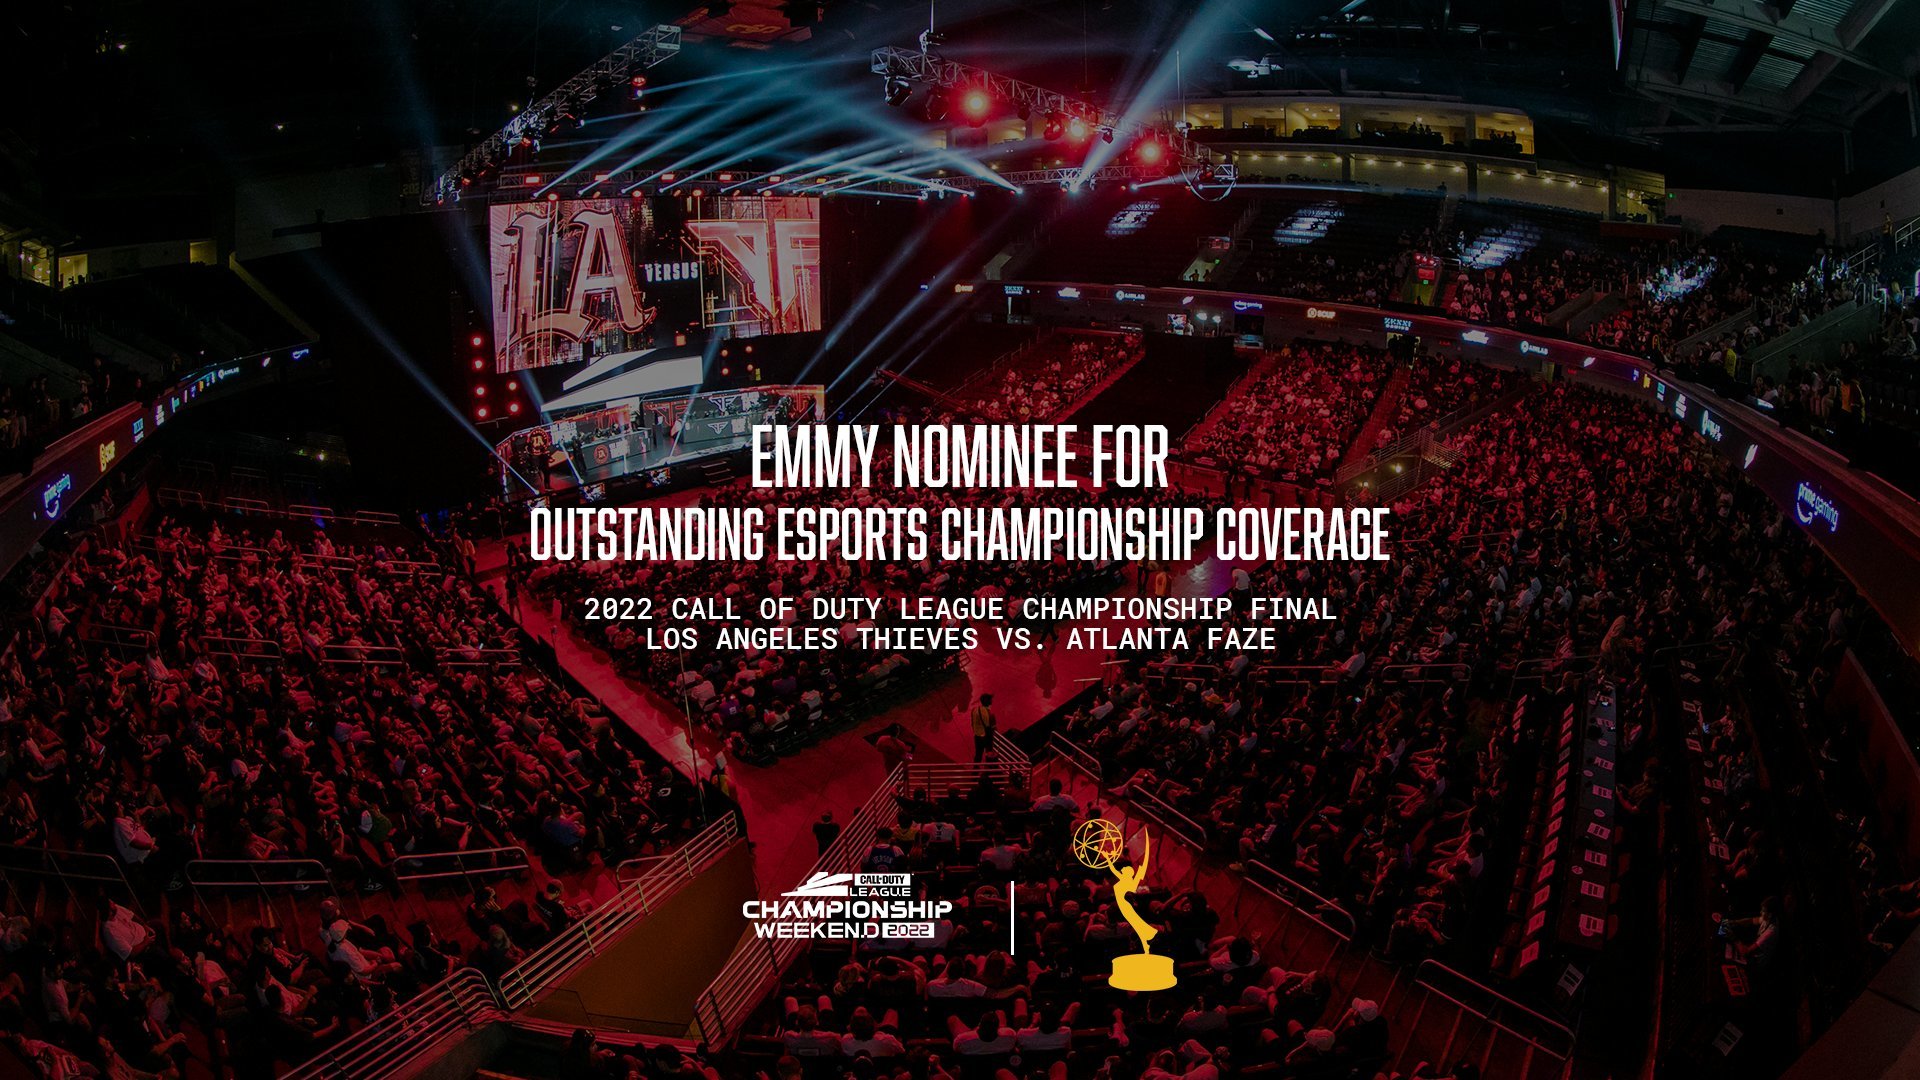 The Call of Duty League has been nominated for a Sports Emmy